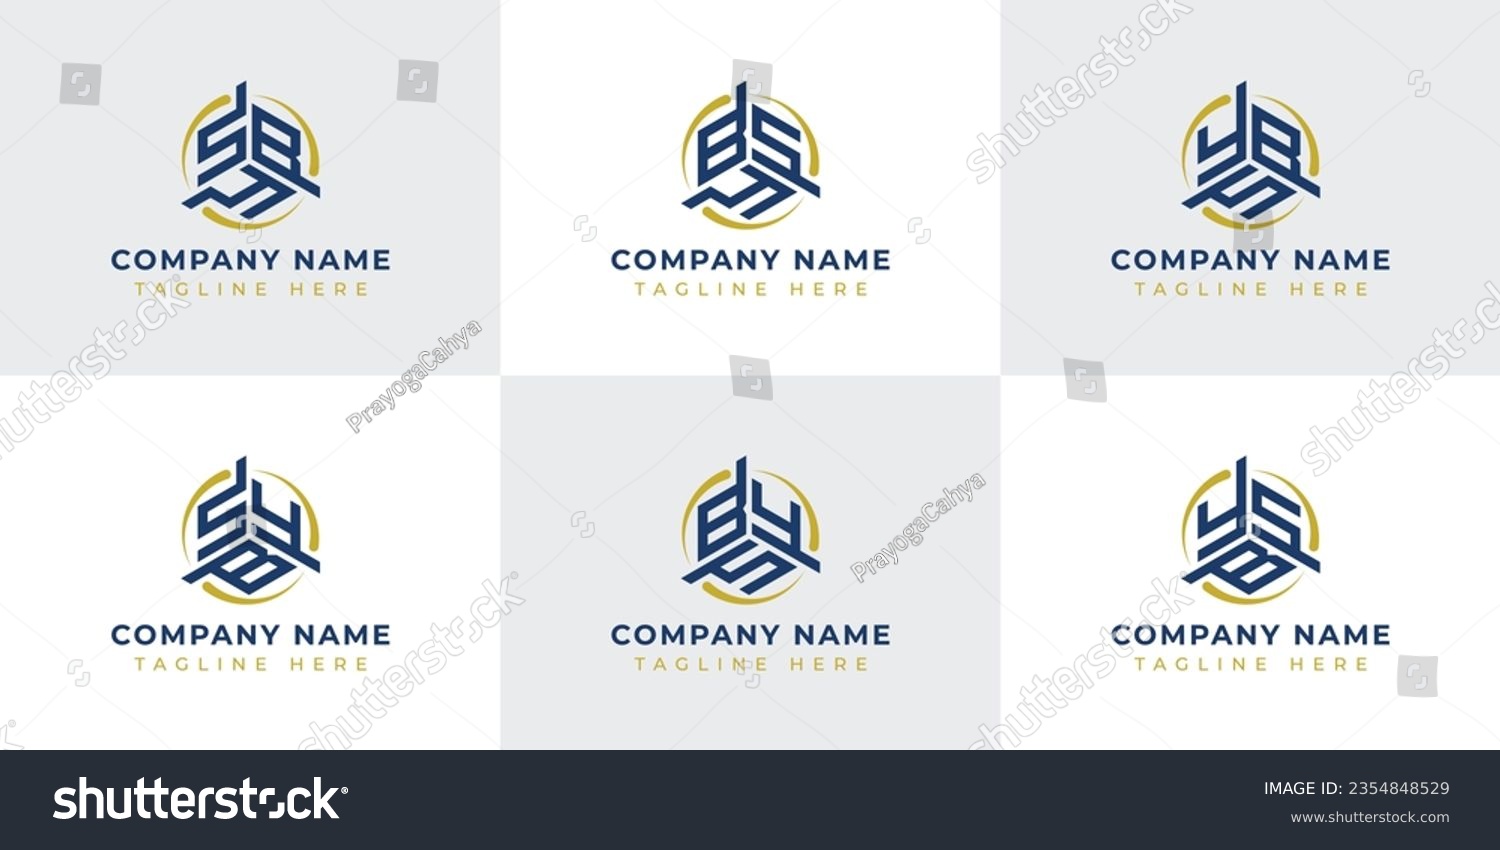 SVG of Letter SBY, SYB, BSY, BYS, YSB, YBS Hexagonal Technology Logo Set. Suitable for any business. svg